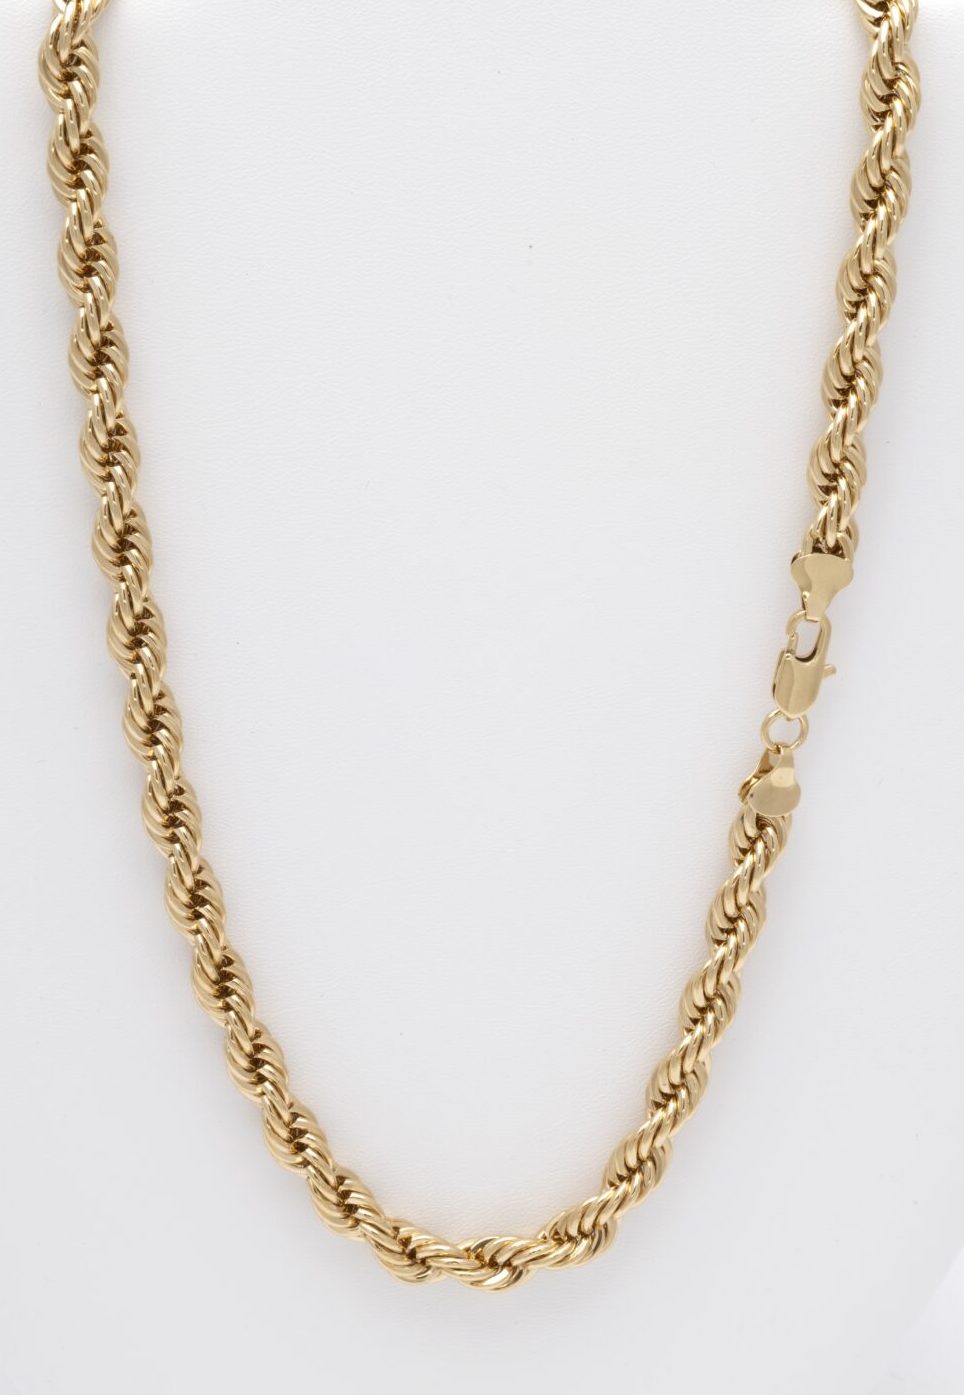 French Rope Chain – Buy Jewelry ETC